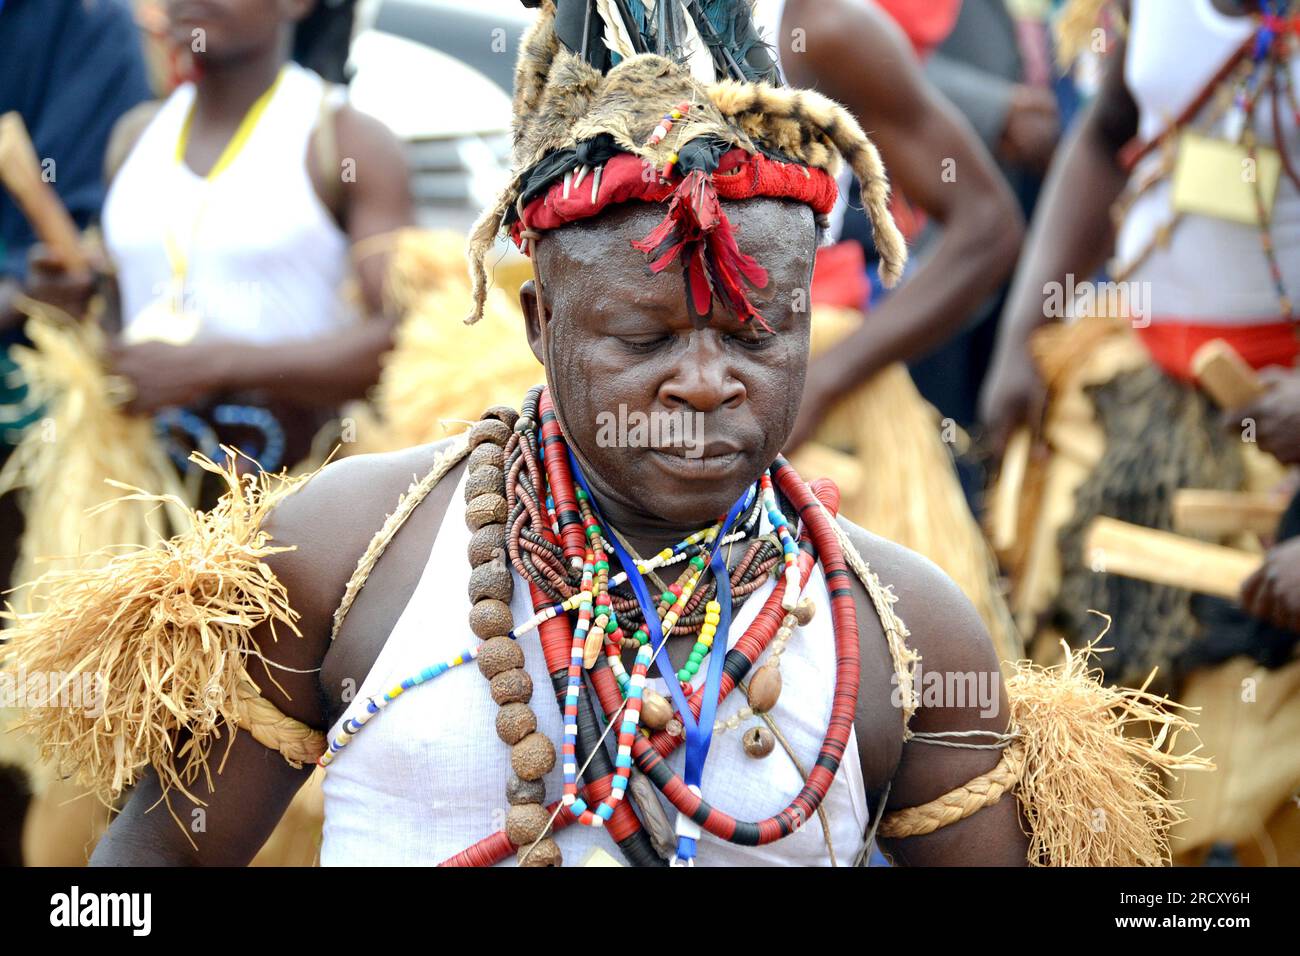 Congolese traditional artist during an exhibition in Sibiti (located between Brazzaville and Pointe-Noire), during an official ceremony, 13 August 2014 Stock Photo